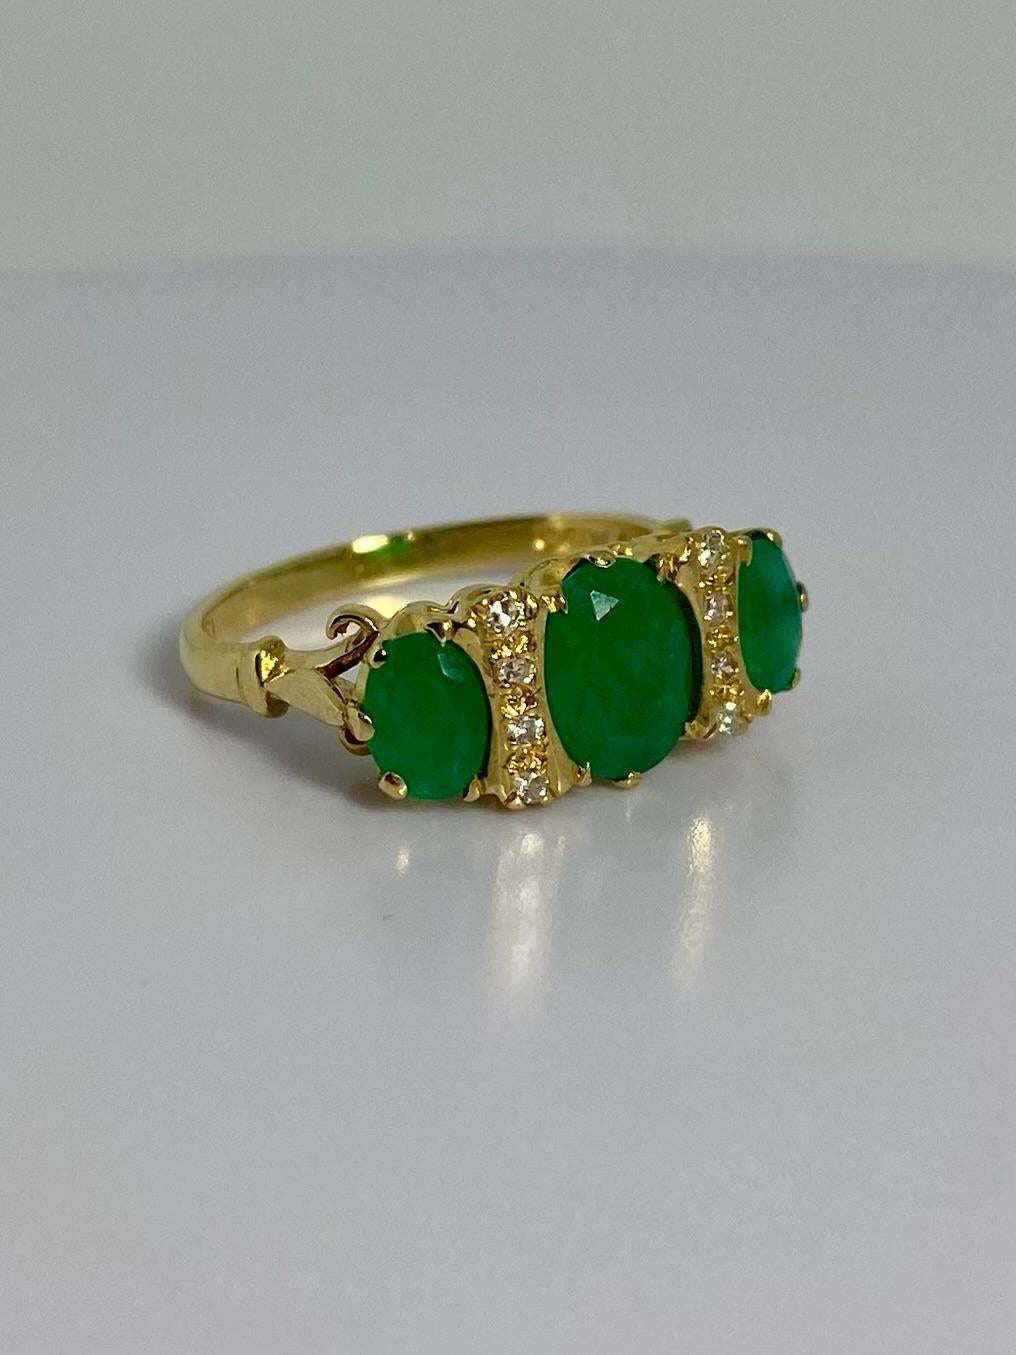 Vintage Warm Golden Ring with Natural Diamonds and Natural Emeralds. One of kind beautiful vintage ring from 1950S. So happy to present to you this very attractive ring which we have not seen before! The condition of this ring is very good. Besides